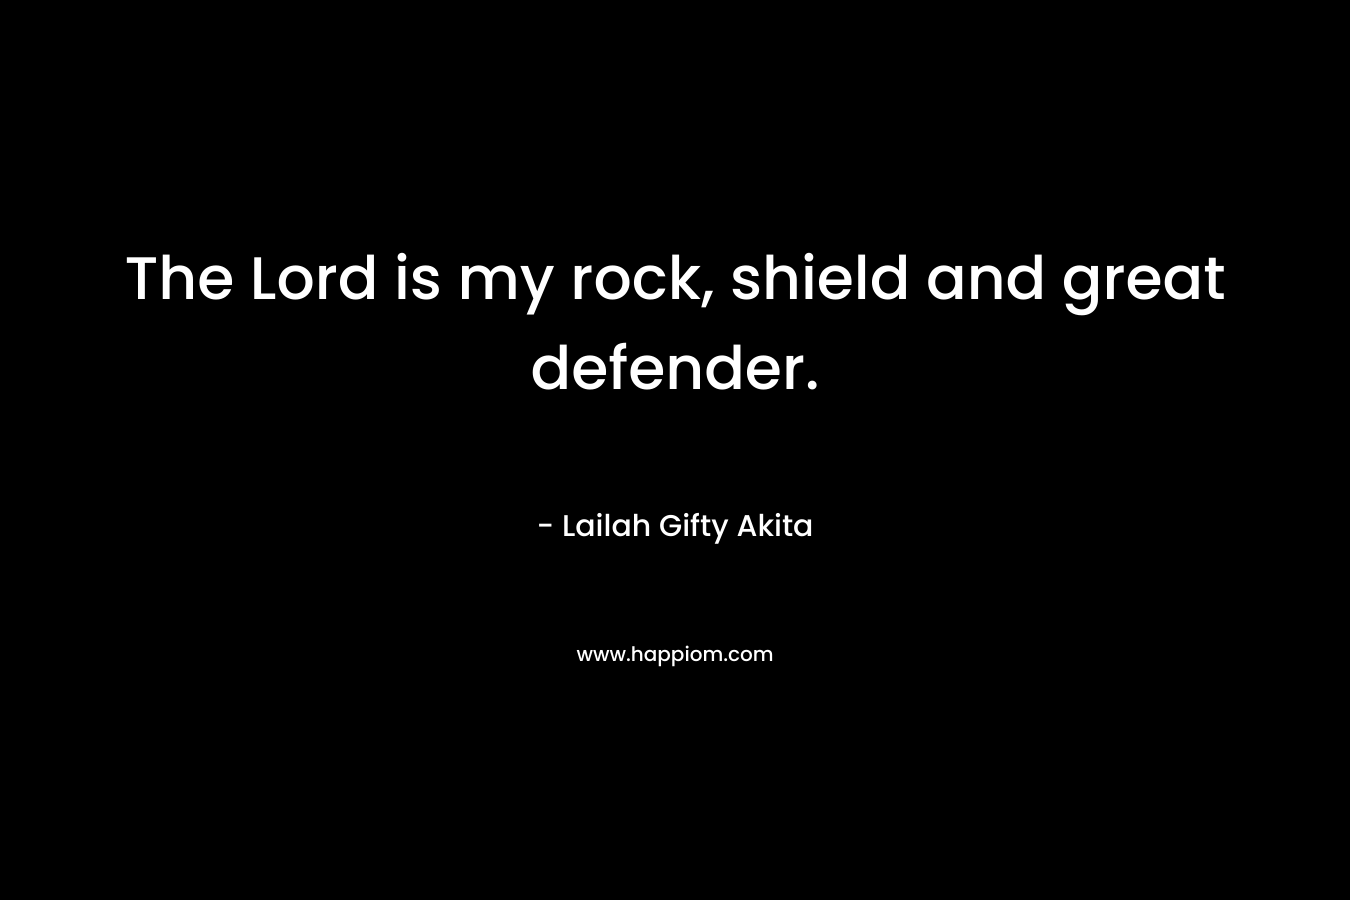 The Lord is my rock, shield and great defender.